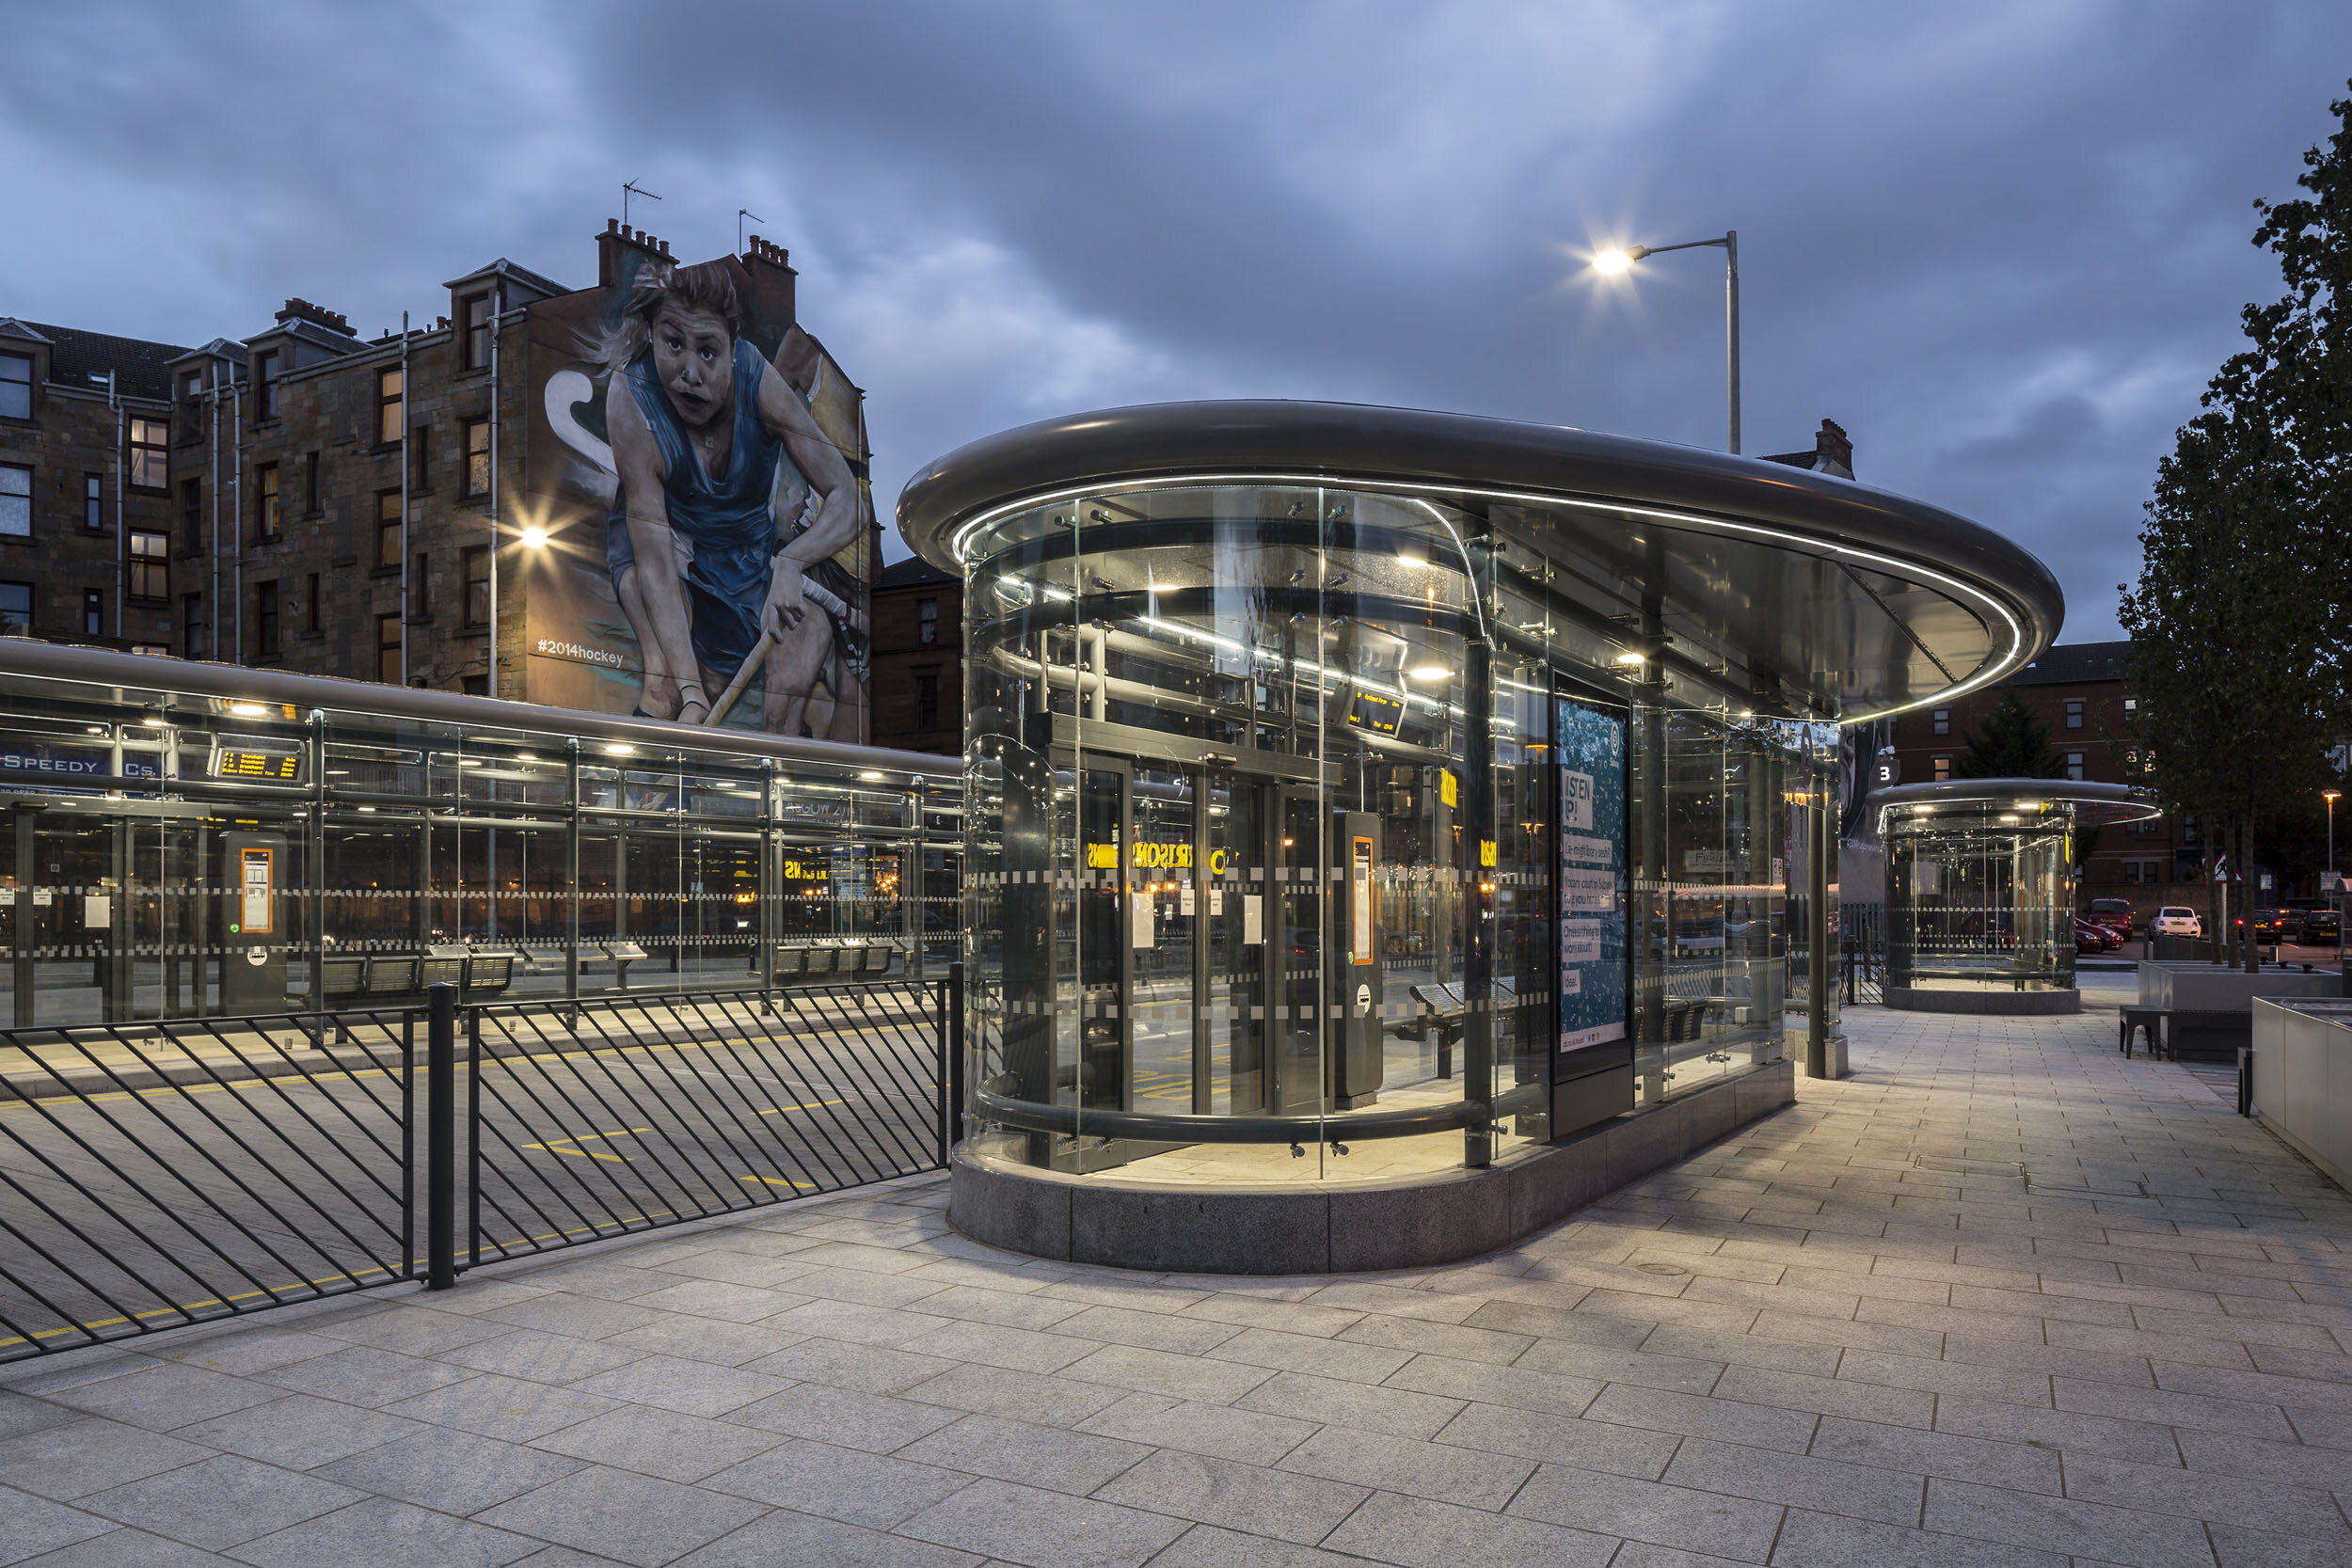 Partick Bus Station by night.jpg